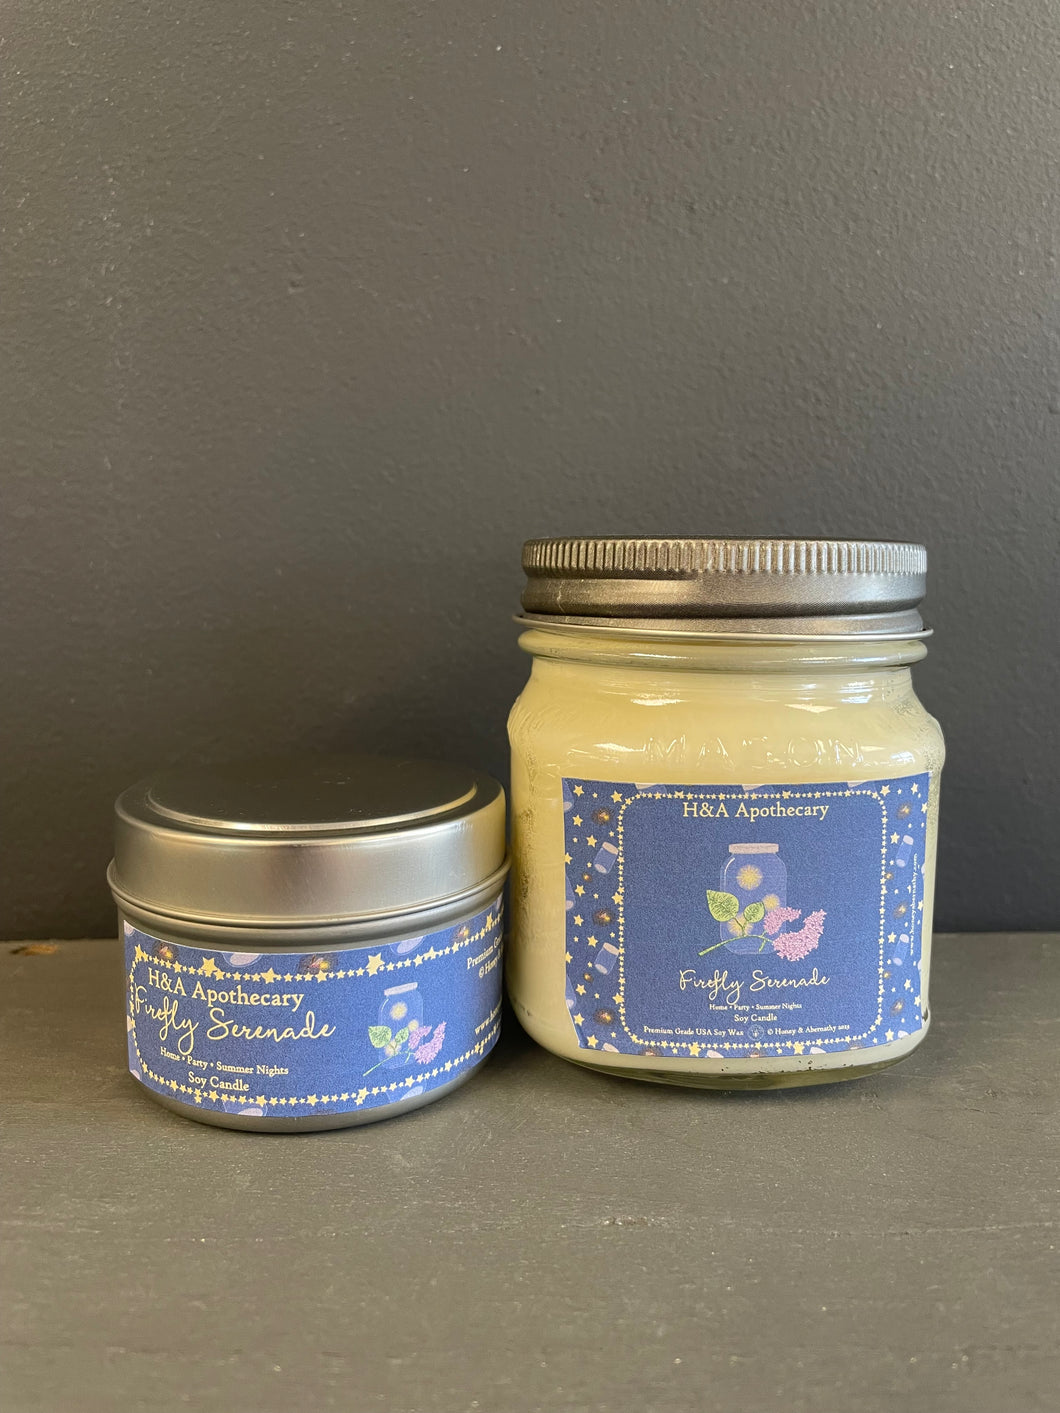 H&A Apothecary Firefly Serenade Soy Candle